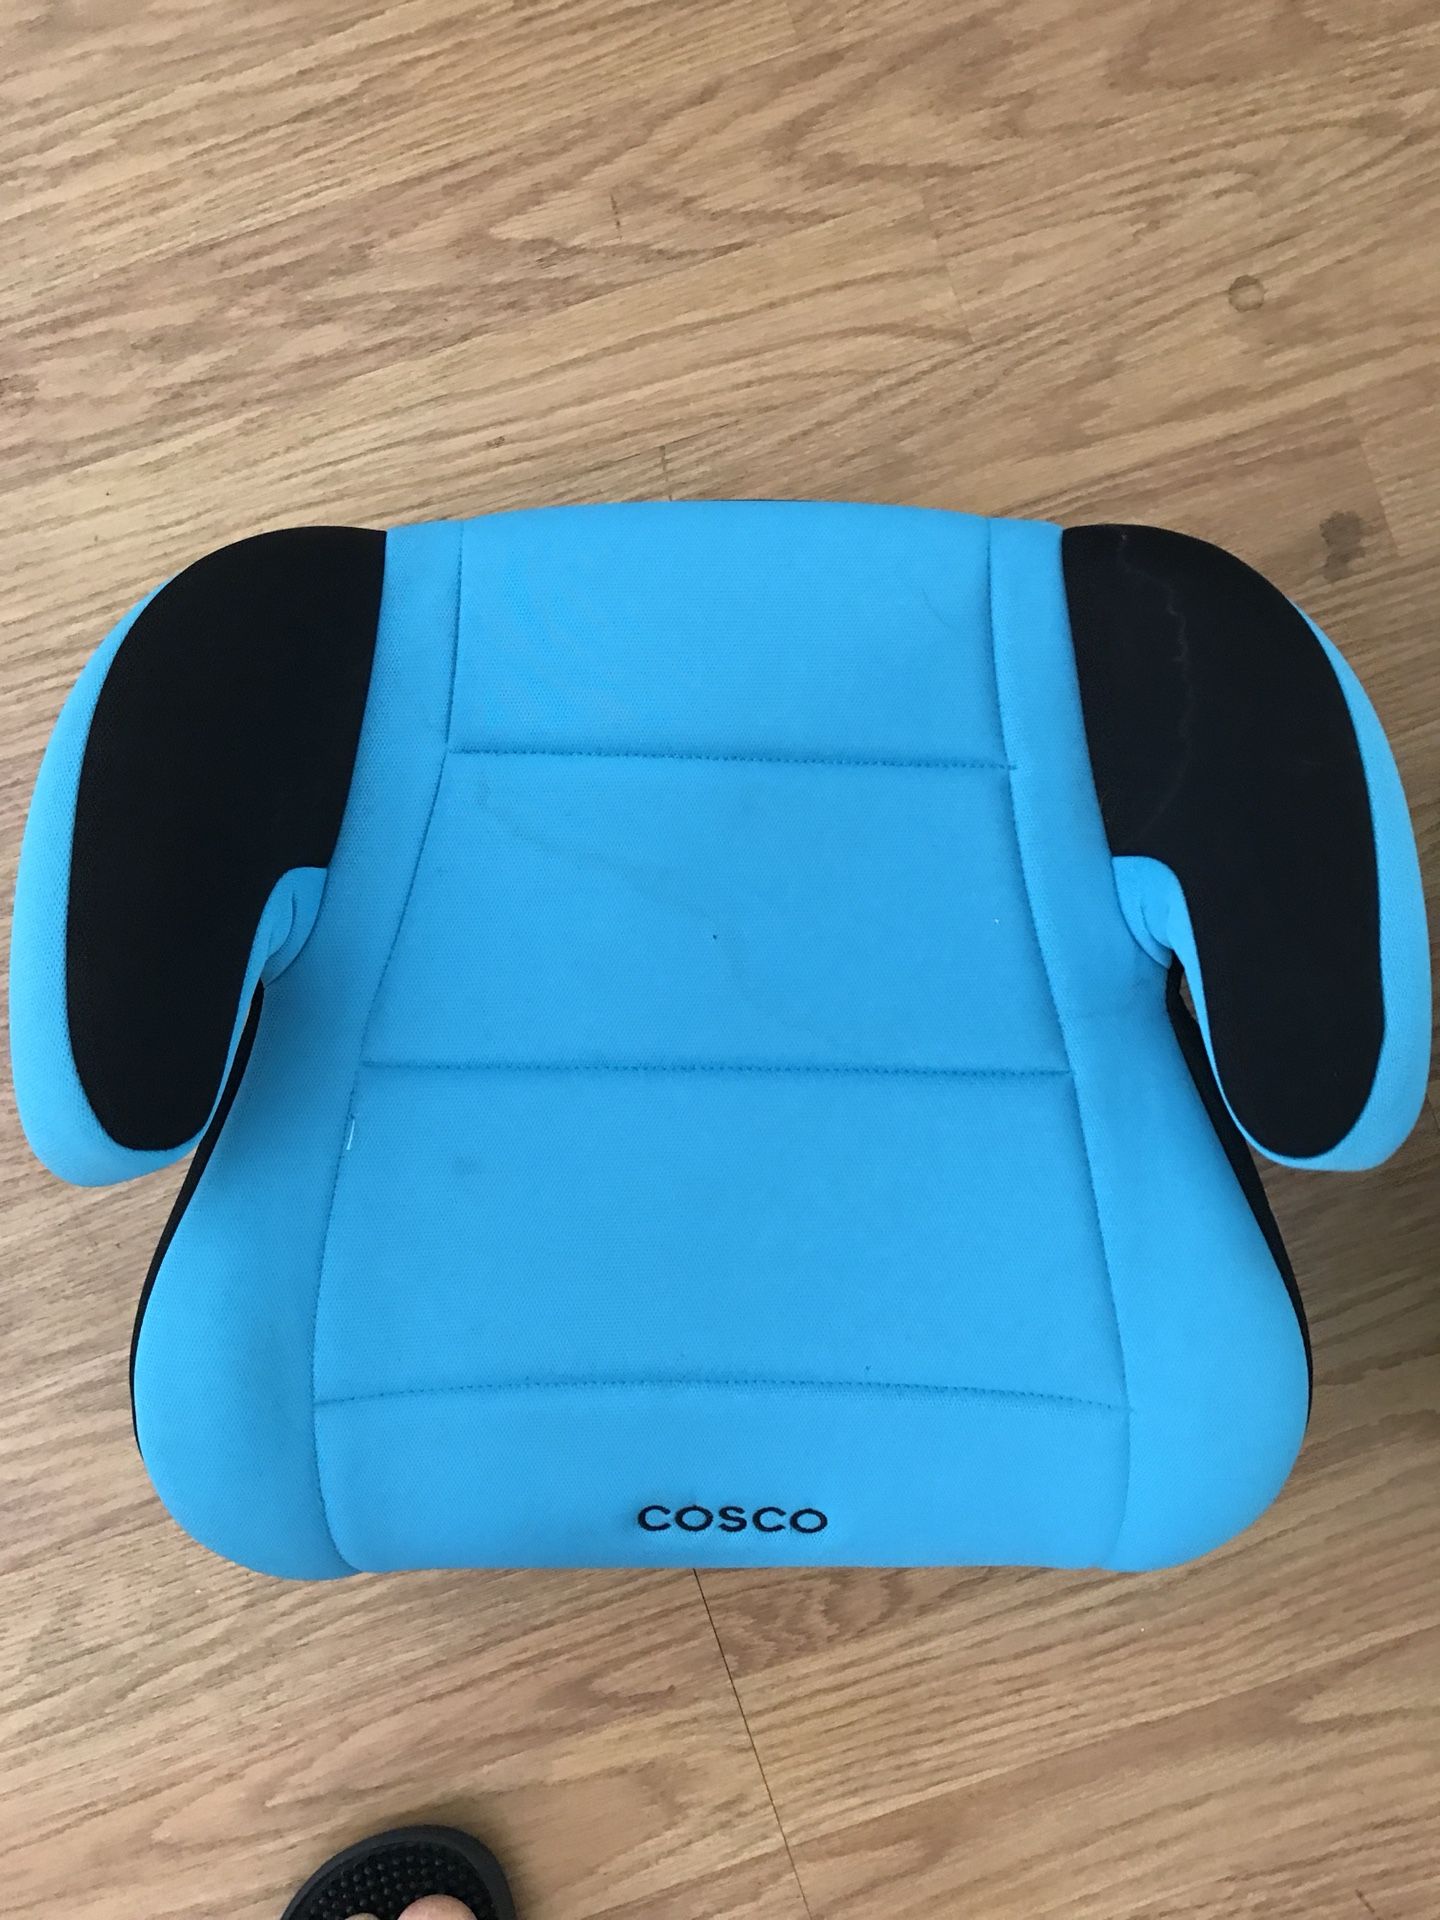 2 Cosco booster seats, 1 was never used and the other only lightly used.